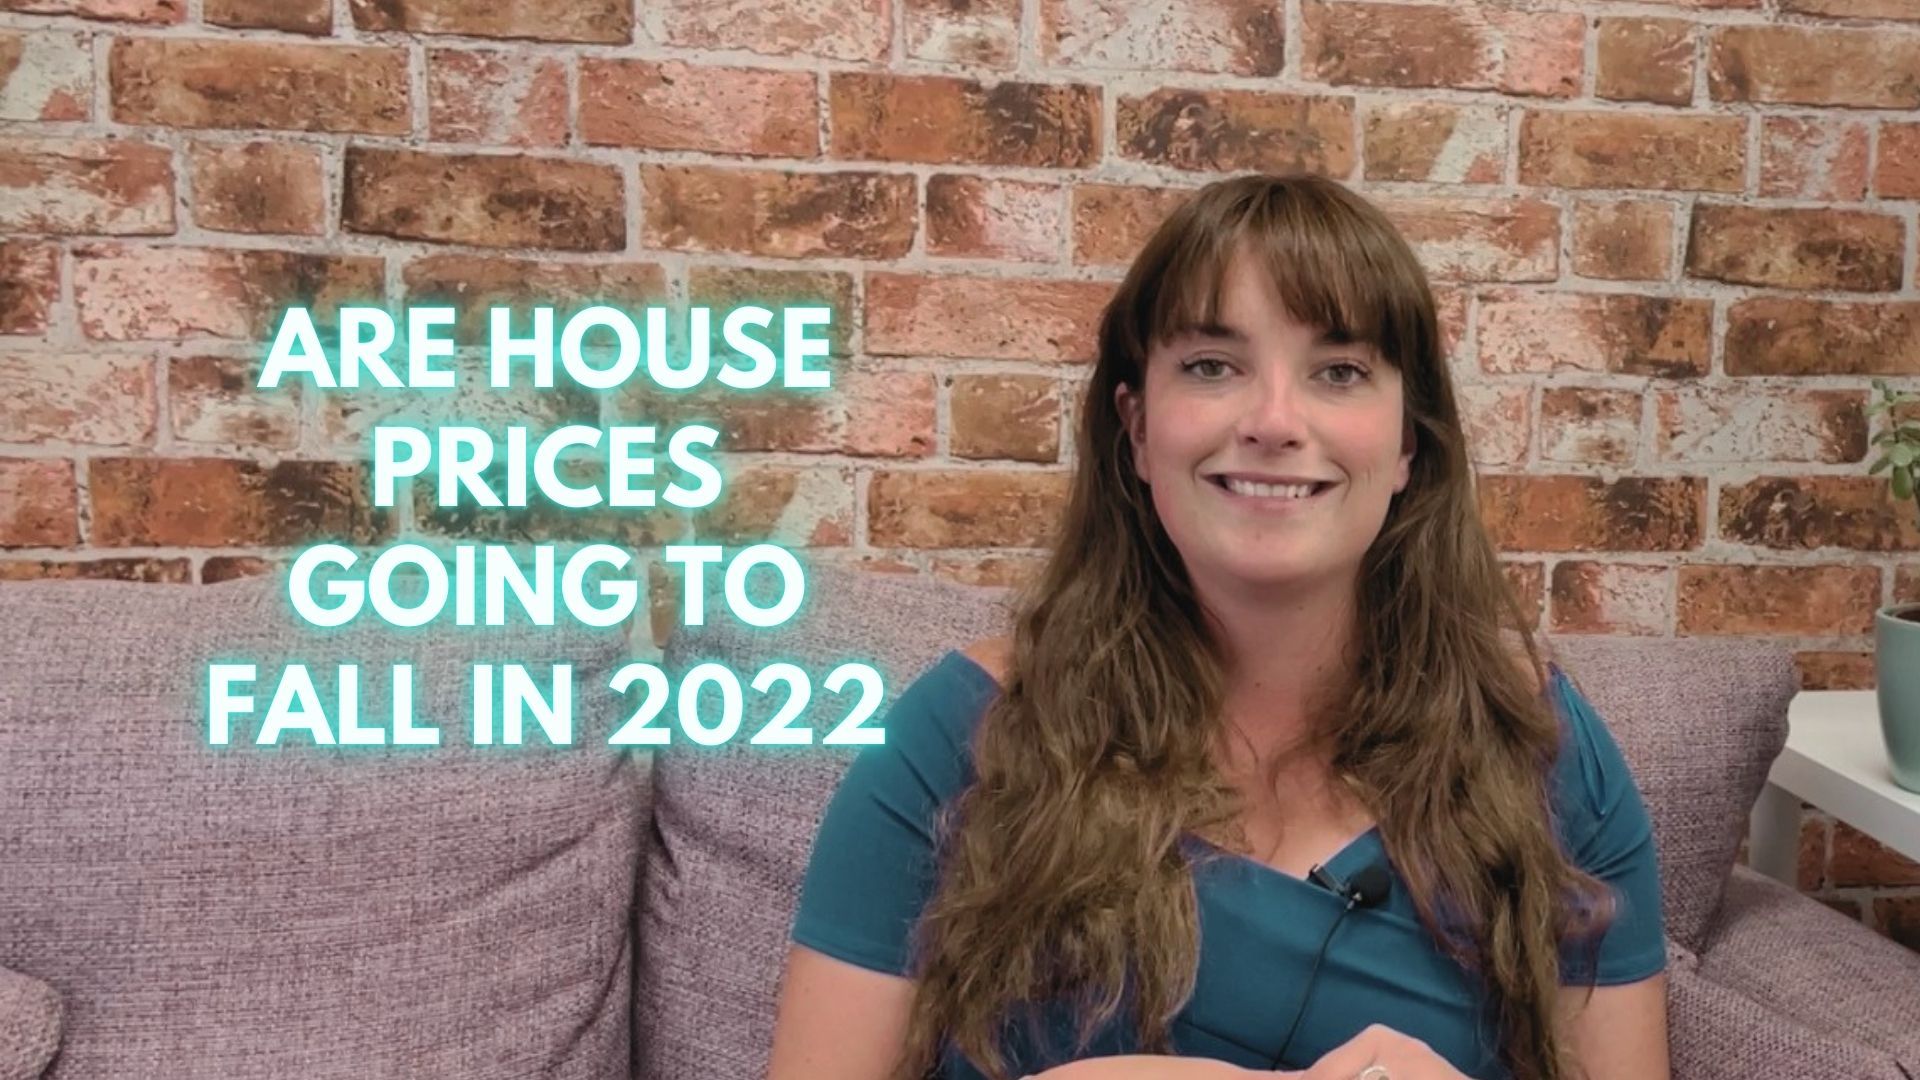 VIDEO: Are House Prices Going To Fall In 2022?